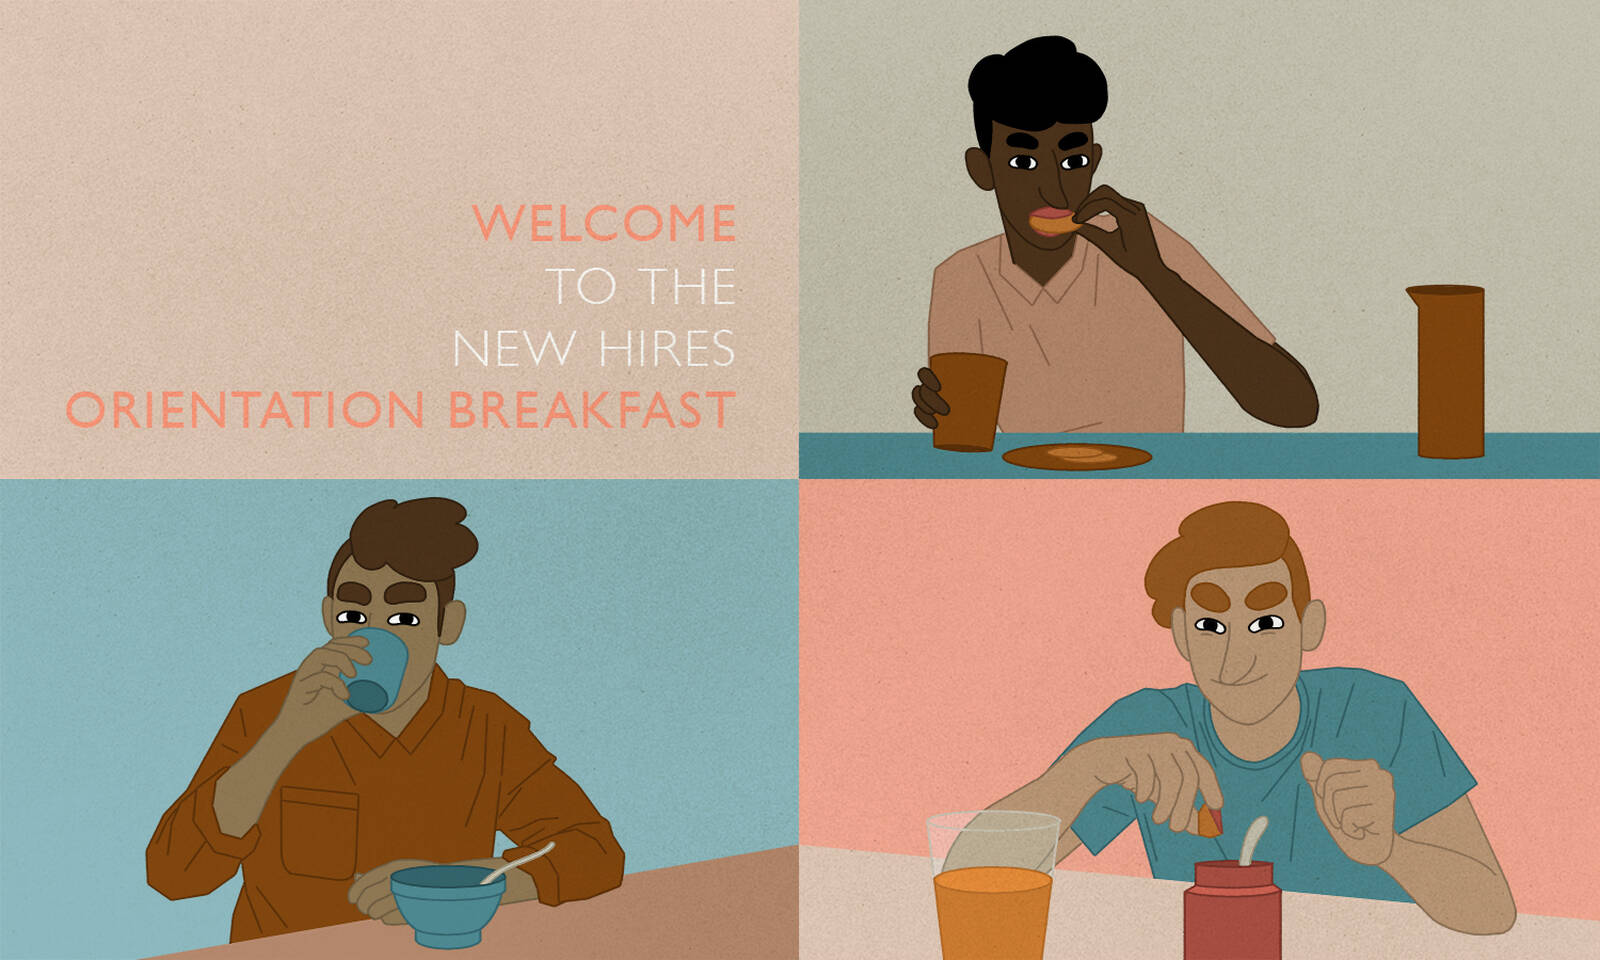 New hires attend a company's orientation breakfast